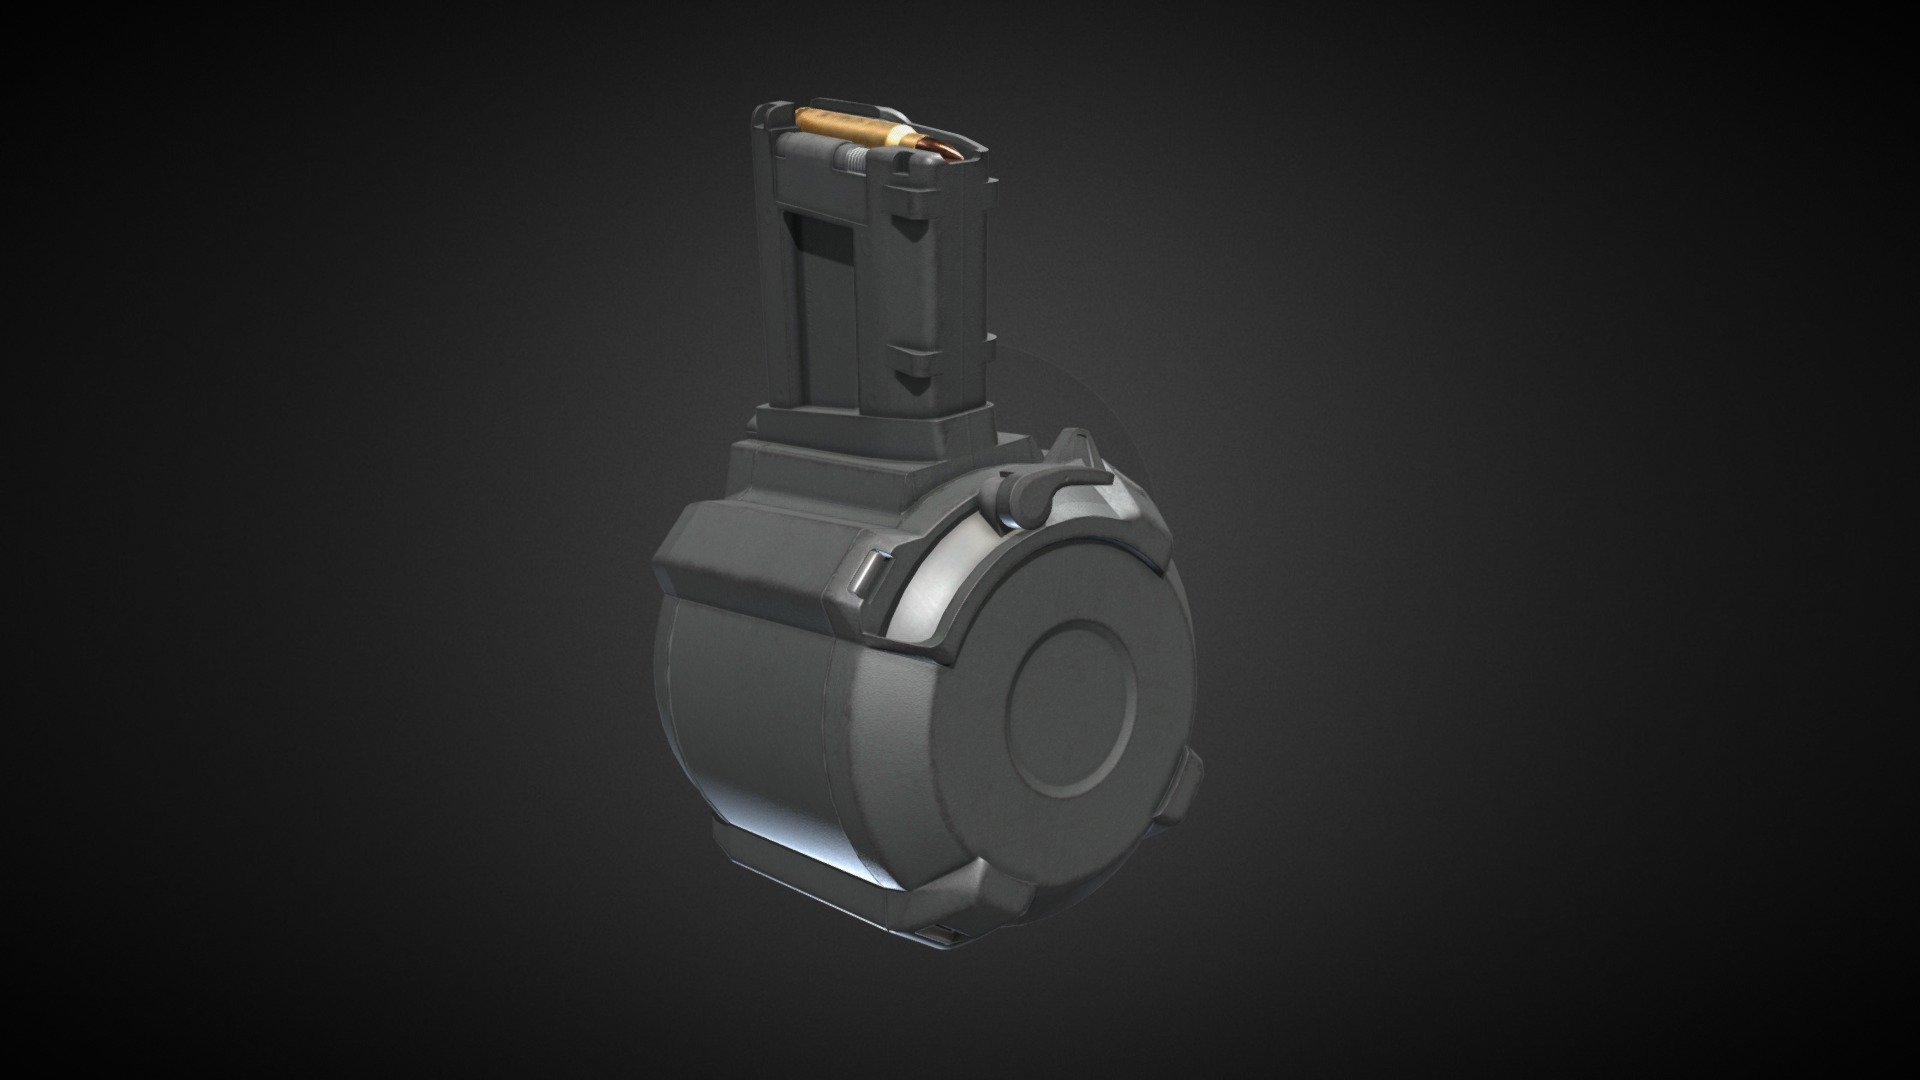 Its a drum that play sound of our people&hellip; pew pew pew&hellip;  

Model have one PBR Material in 4K. Black and FDE colors included.

Verts: 3.1K

Tris: 6.1K  

Made in Blender.  

PS. Model is not made to be 3D printed, do not ask for conversion or scalling 3d model